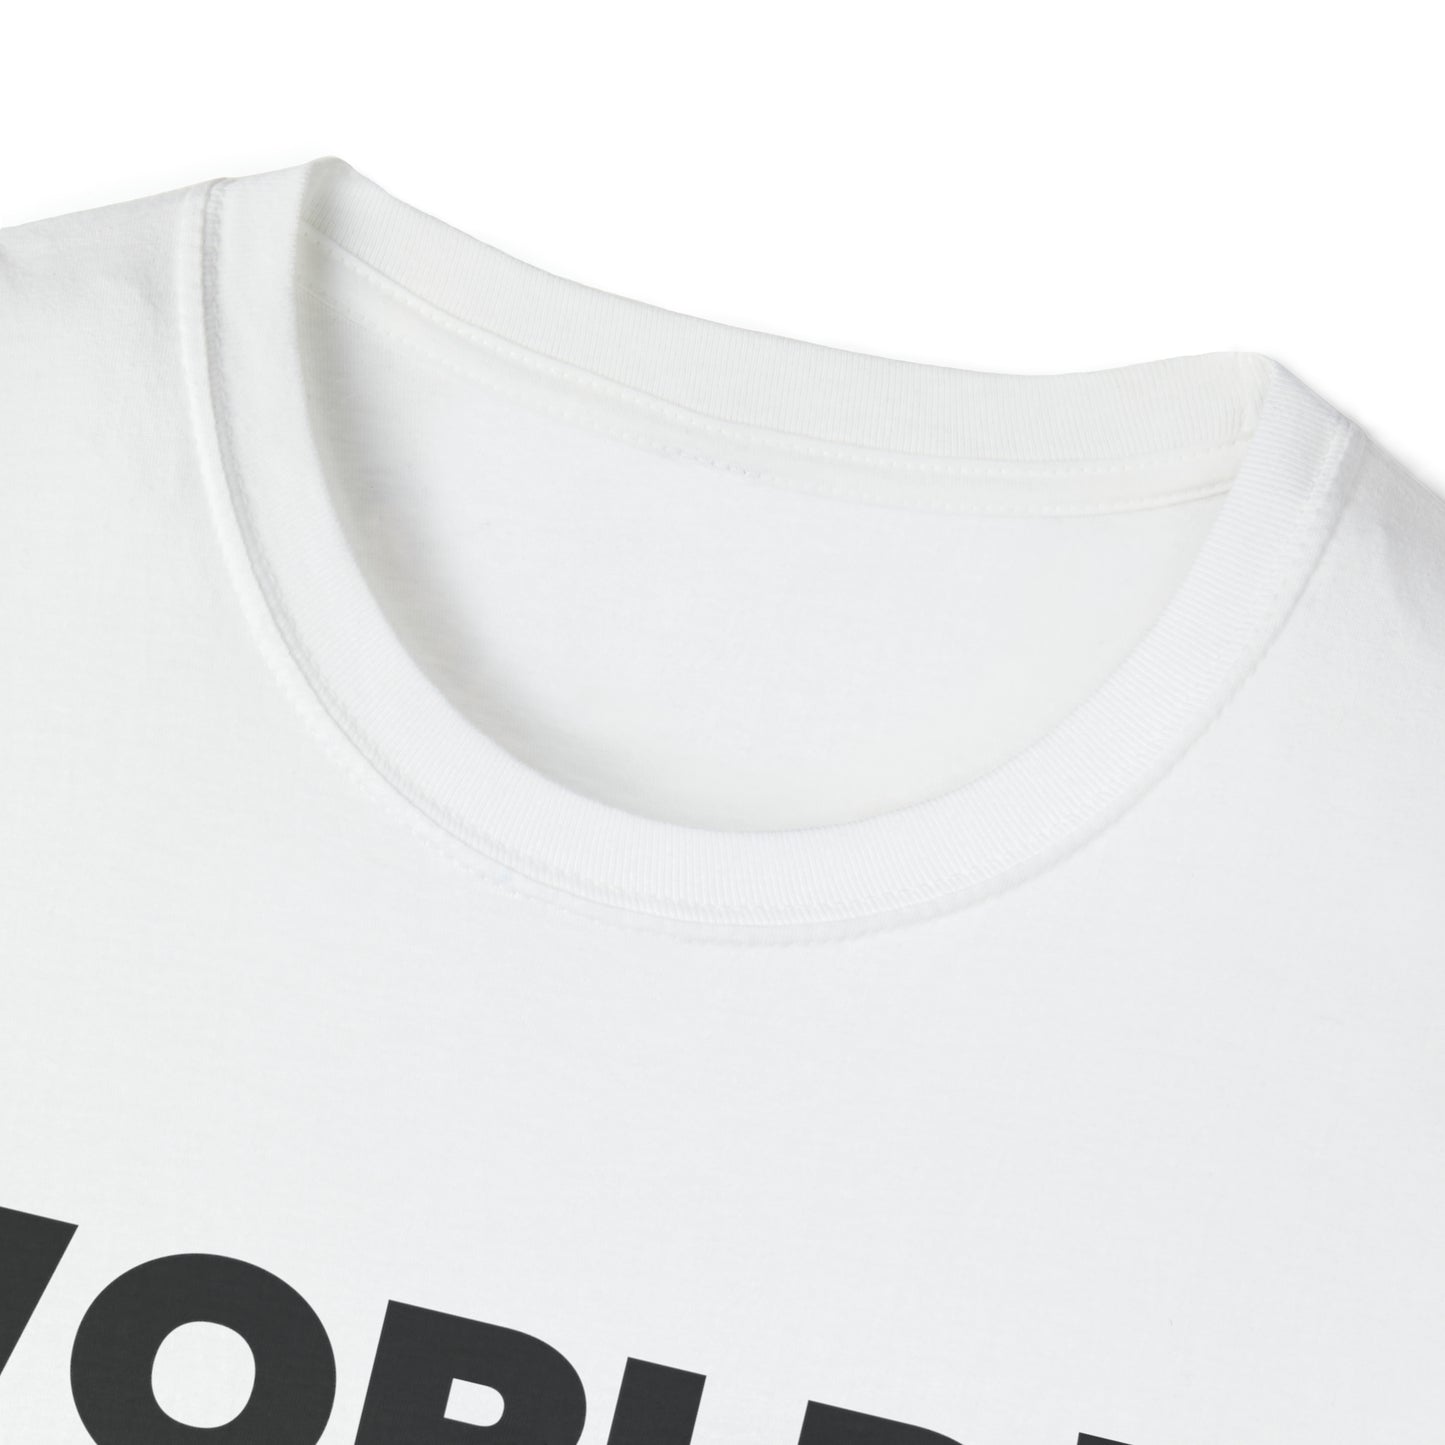 World's Most Okay Dad - The Tee for the Wonderfully Average Dad